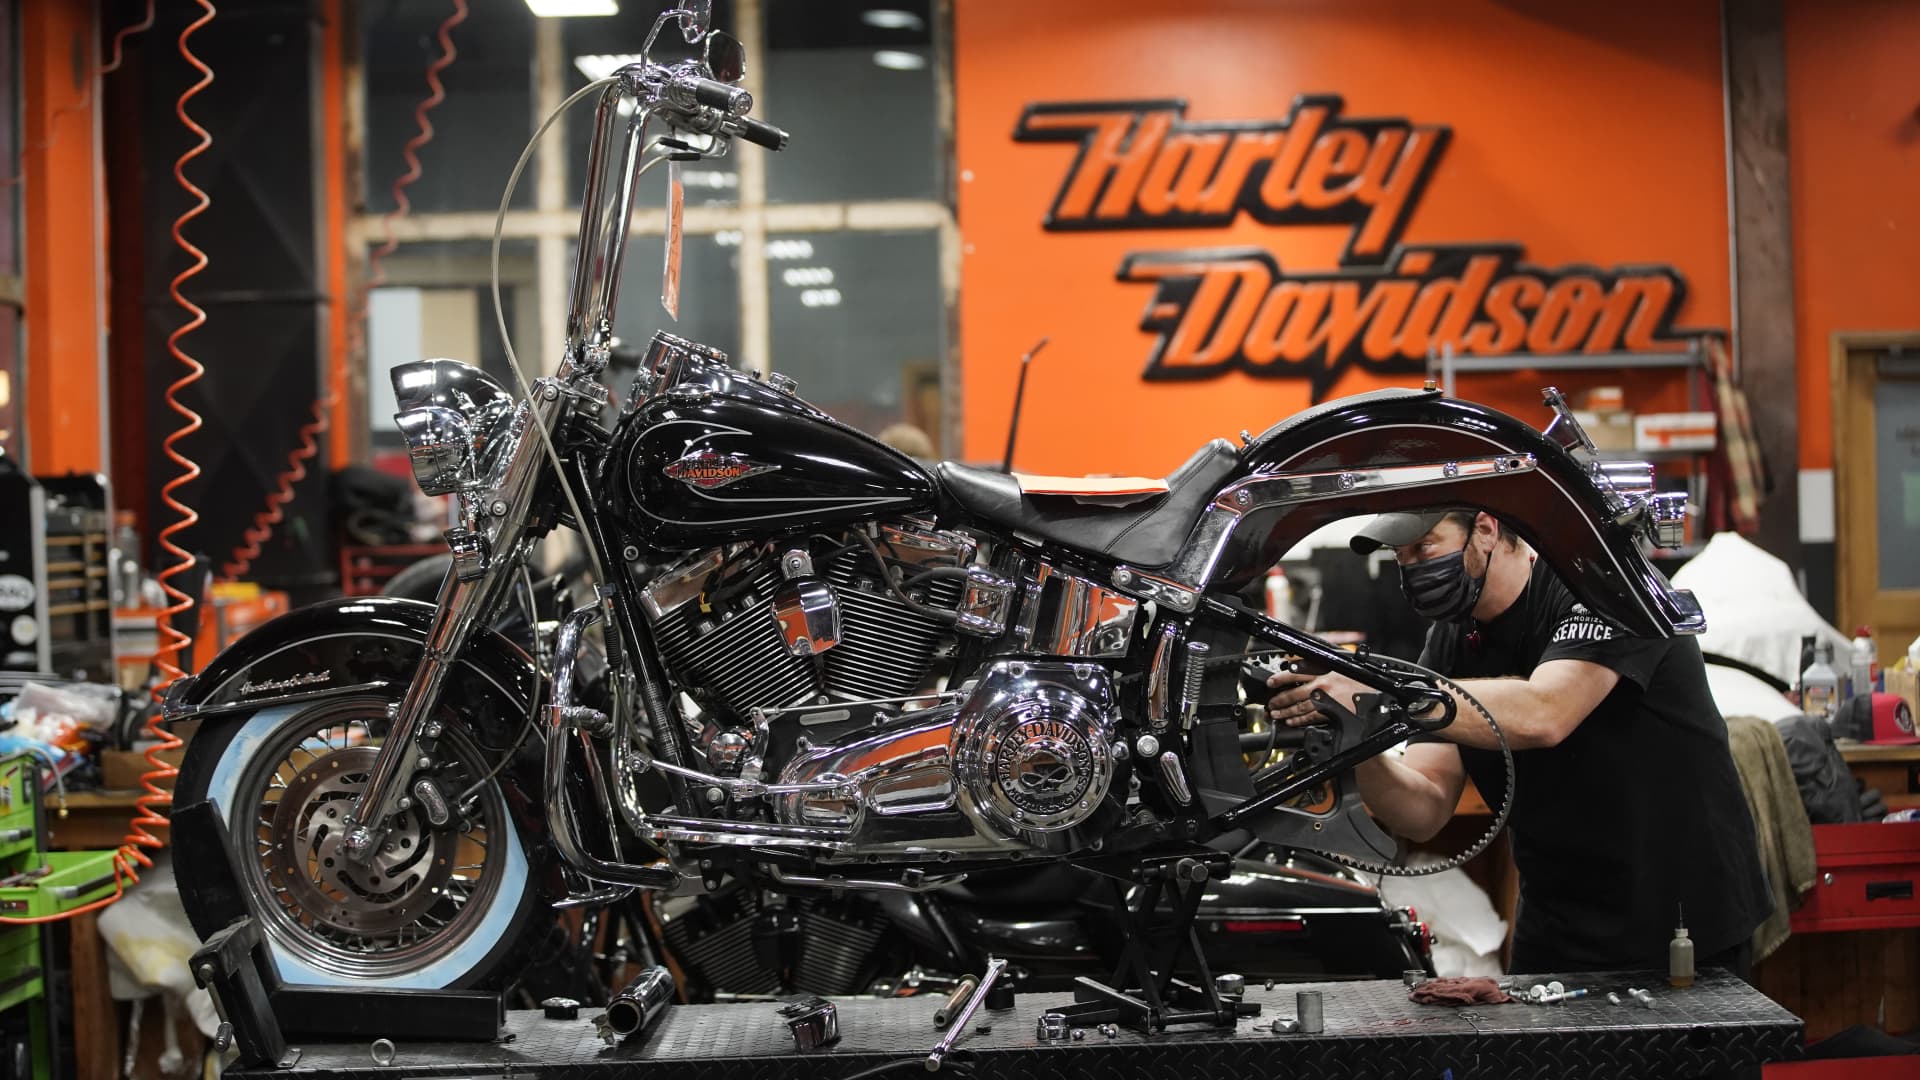 A mechanic works on a motorcycle at a Harley-Davidson showroom and repair shop in Lindon, Utah, U.S., on Monday, April 19, 2021.